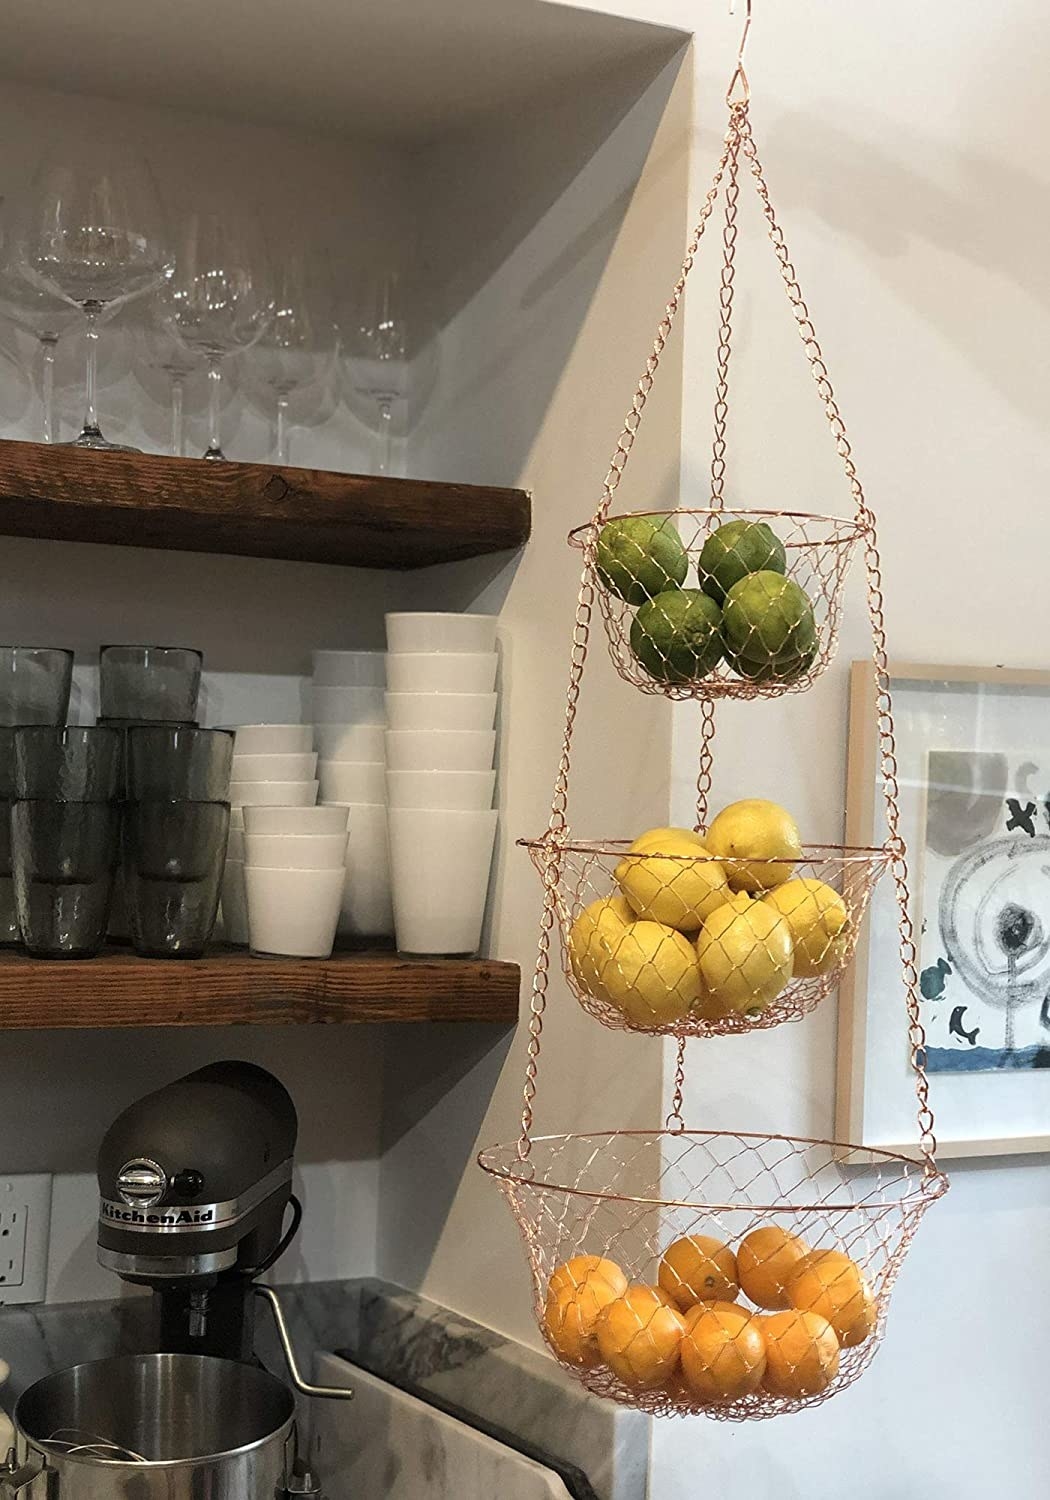 Three-tiered hanging basket displayed in a kitchen holding three different types of fruit in each basket